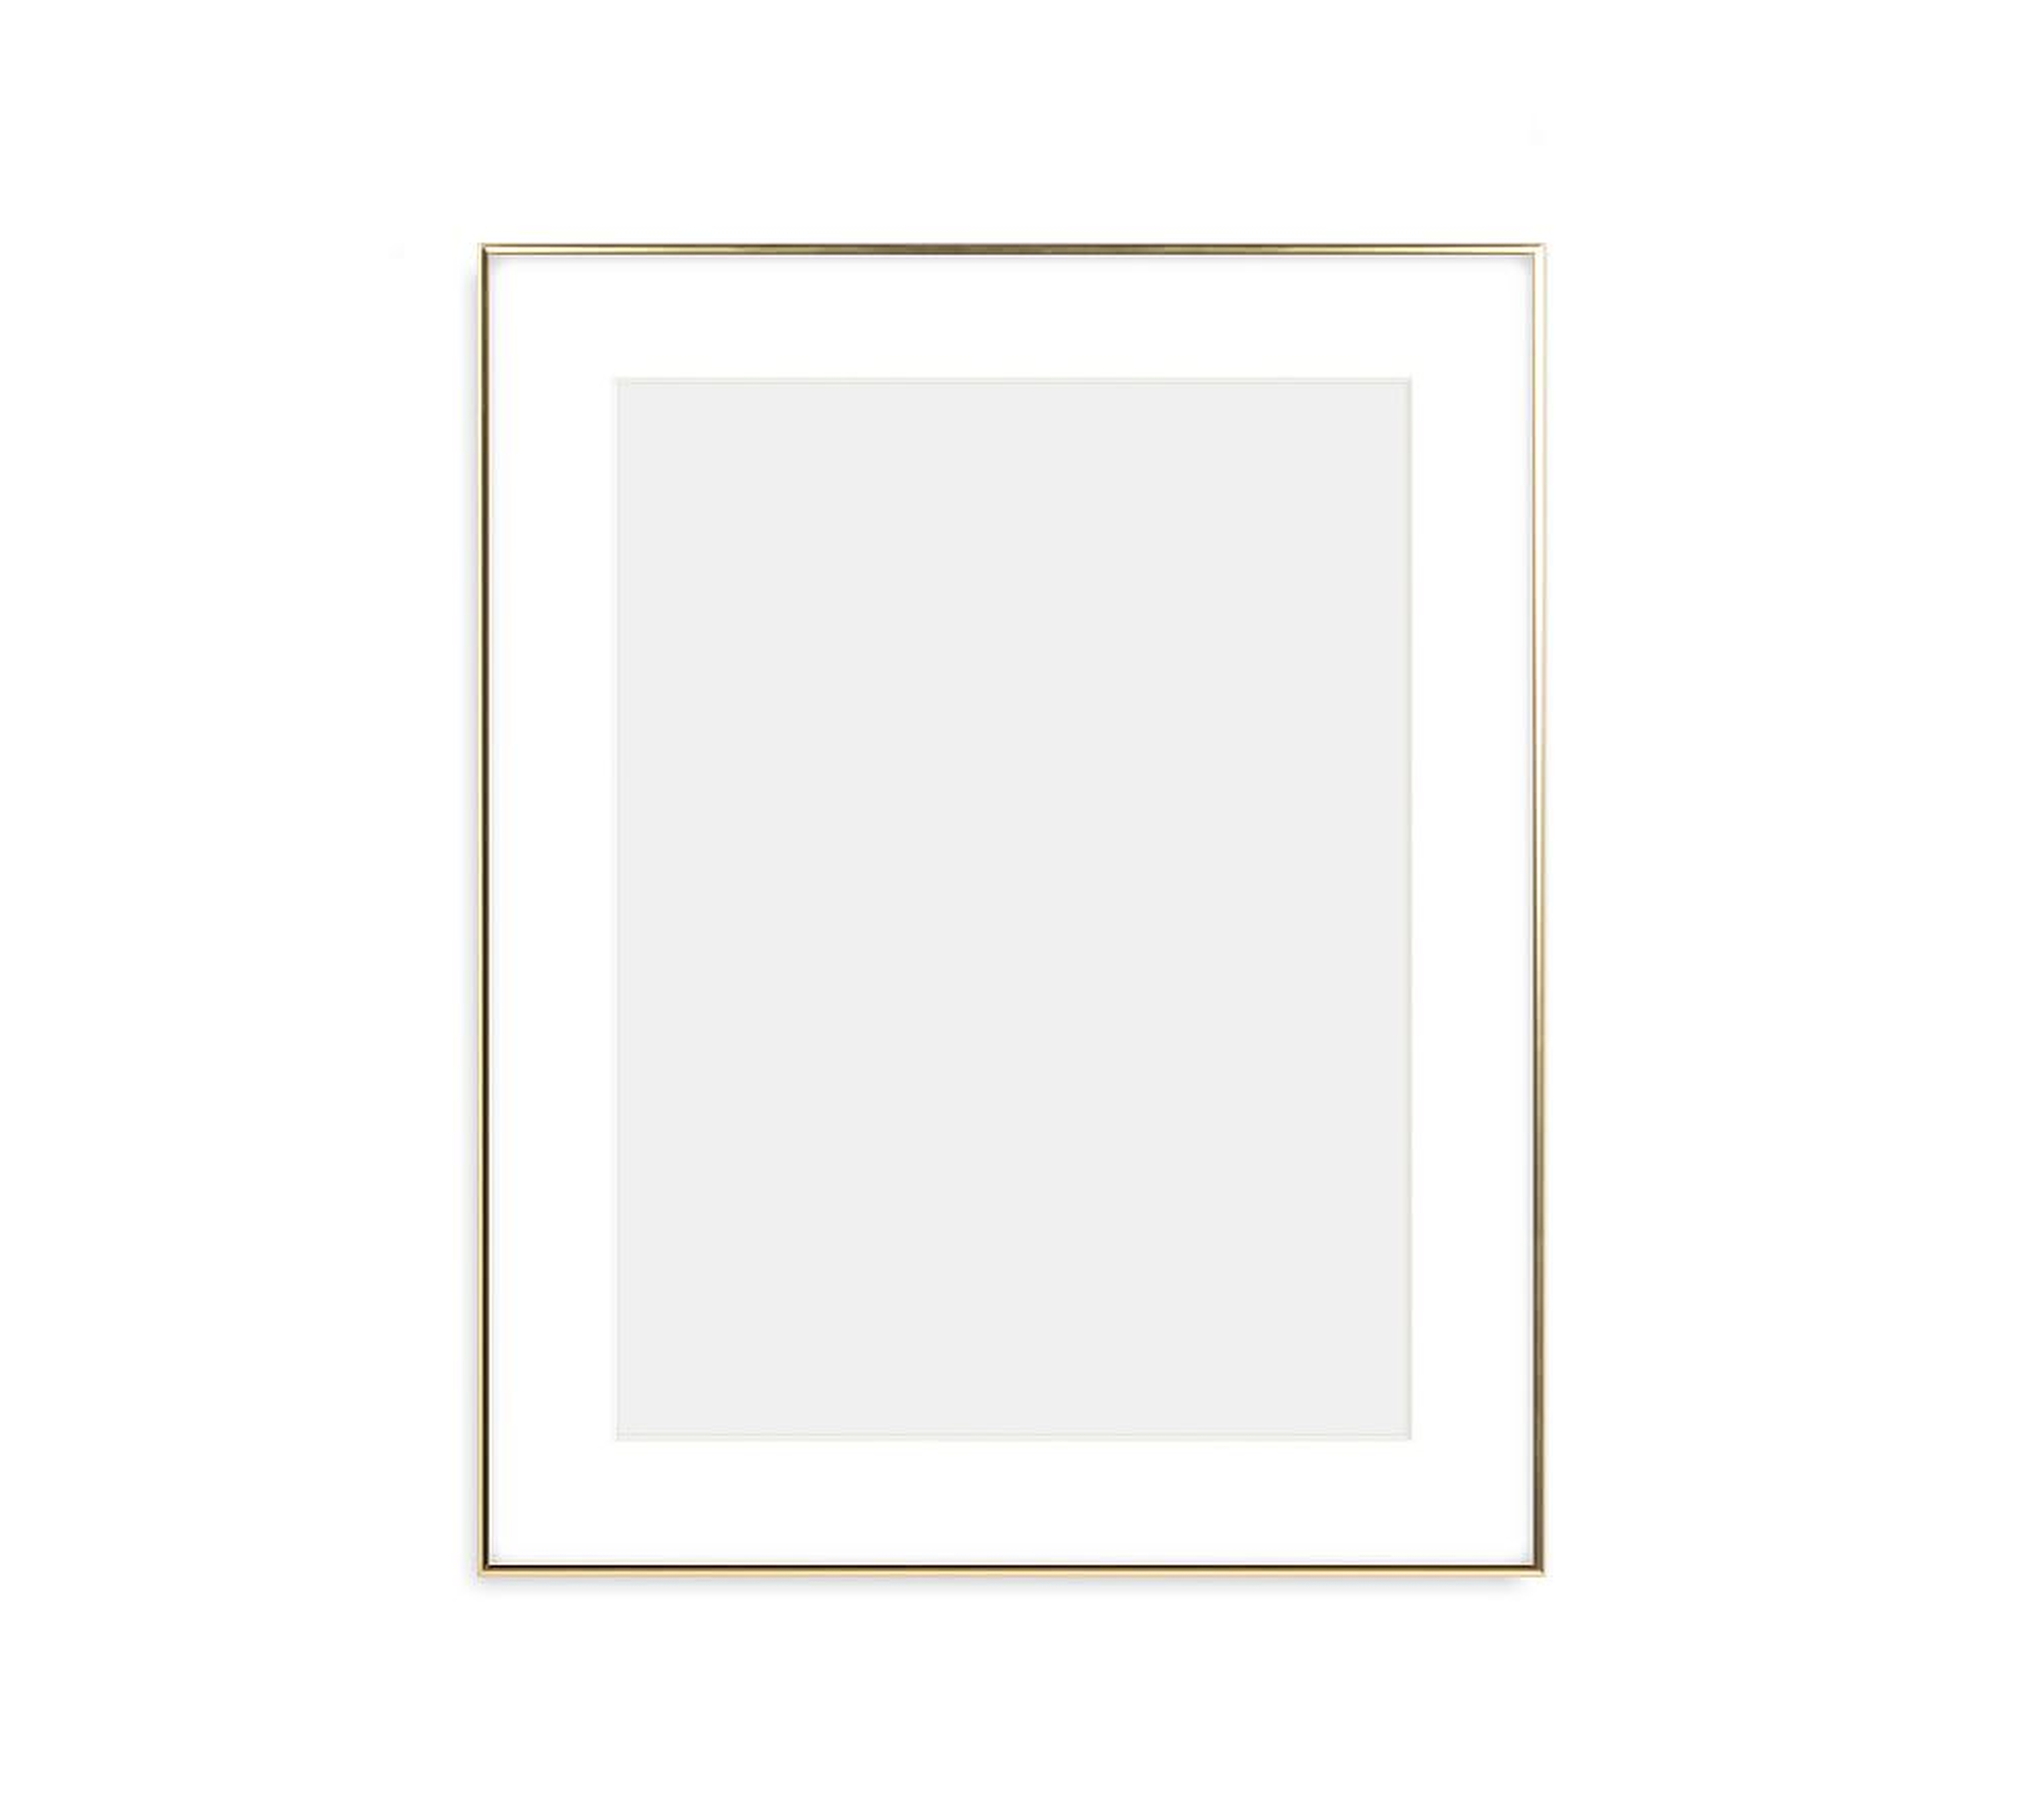 Thin Metal Gallery Frame, 3" Mat, 18x24 - Bright Gold - Pottery Barn